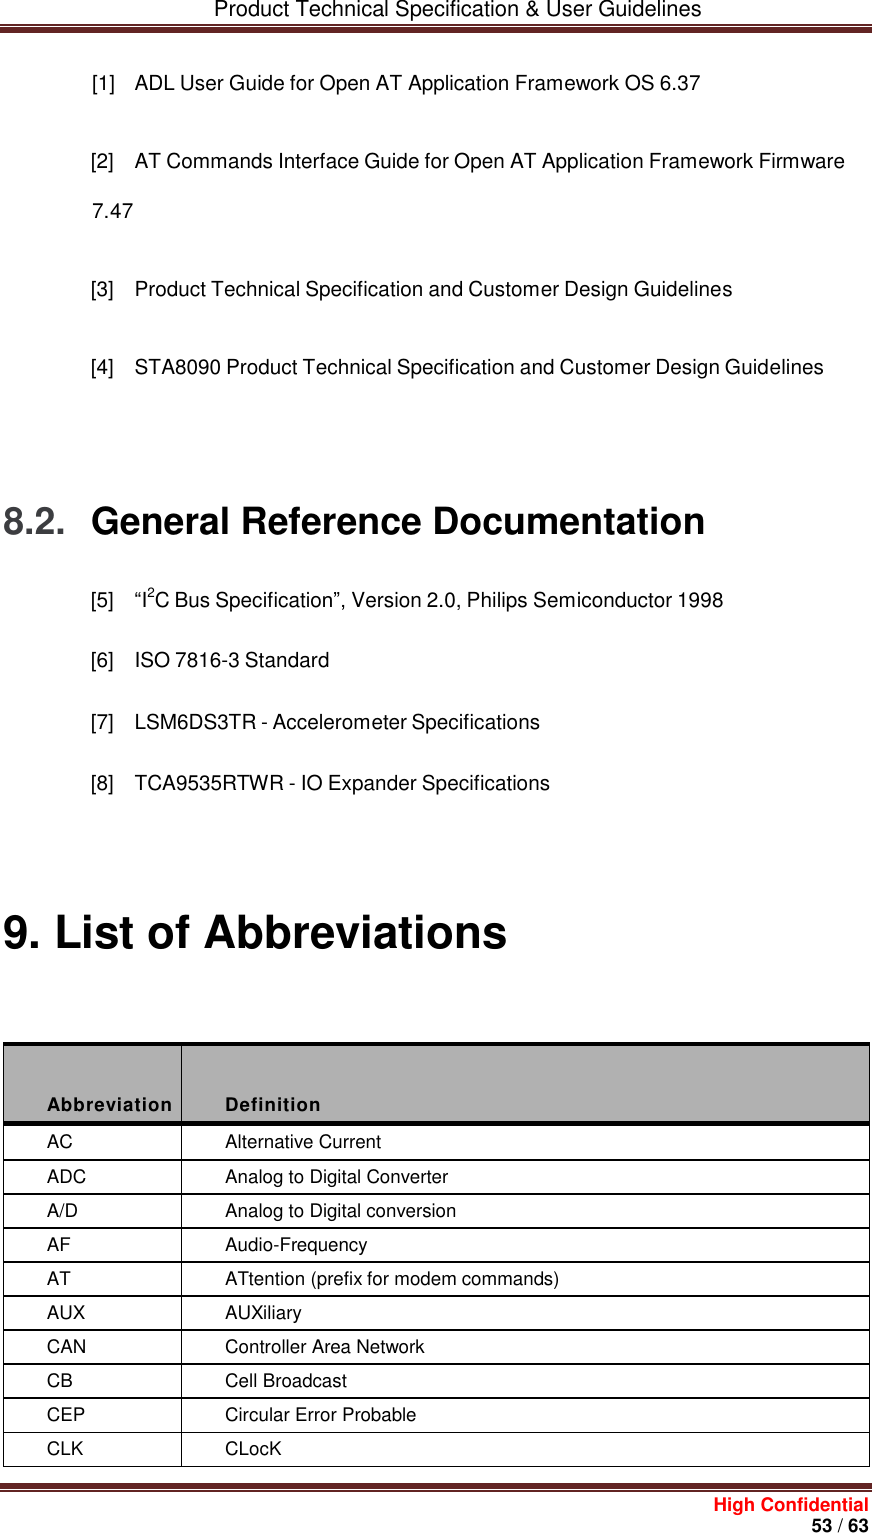         Product Technical Specification &amp; User Guidelines     High Confidential       53 / 63  [1]  ADL User Guide for Open AT Application Framework OS 6.37   [2]  AT Commands Interface Guide for Open AT Application Framework Firmware 7.47   [3]  Product Technical Specification and Customer Design Guidelines   [4]  STA8090 Product Technical Specification and Customer Design Guidelines         8.2.  General Reference Documentation [5]  “I2C Bus Specification”, Version 2.0, Philips Semiconductor 1998 [6]  ISO 7816-3 Standard [7]  LSM6DS3TR - Accelerometer Specifications [8]  TCA9535RTWR - IO Expander Specifications  9. List of Abbreviations   Abbreviation  Definition AC Alternative Current ADC Analog to Digital Converter A/D Analog to Digital conversion AF Audio-Frequency AT ATtention (prefix for modem commands) AUX AUXiliary CAN Controller Area Network CB Cell Broadcast CEP Circular Error Probable CLK CLocK 